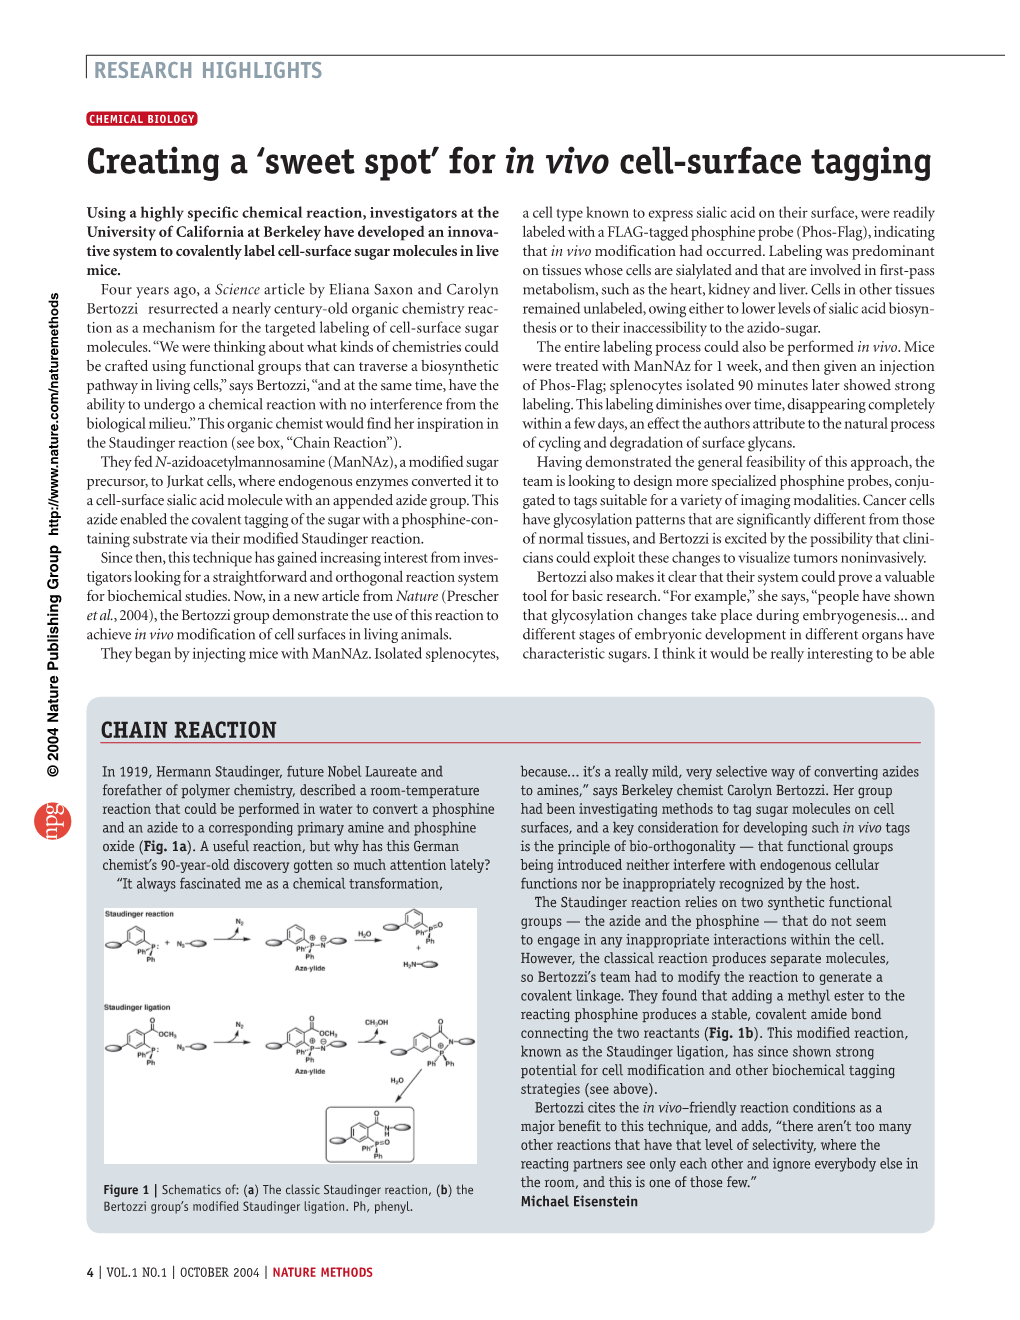 Creating a 'Sweet Spot' for in Vivo Cell-Surface Tagging